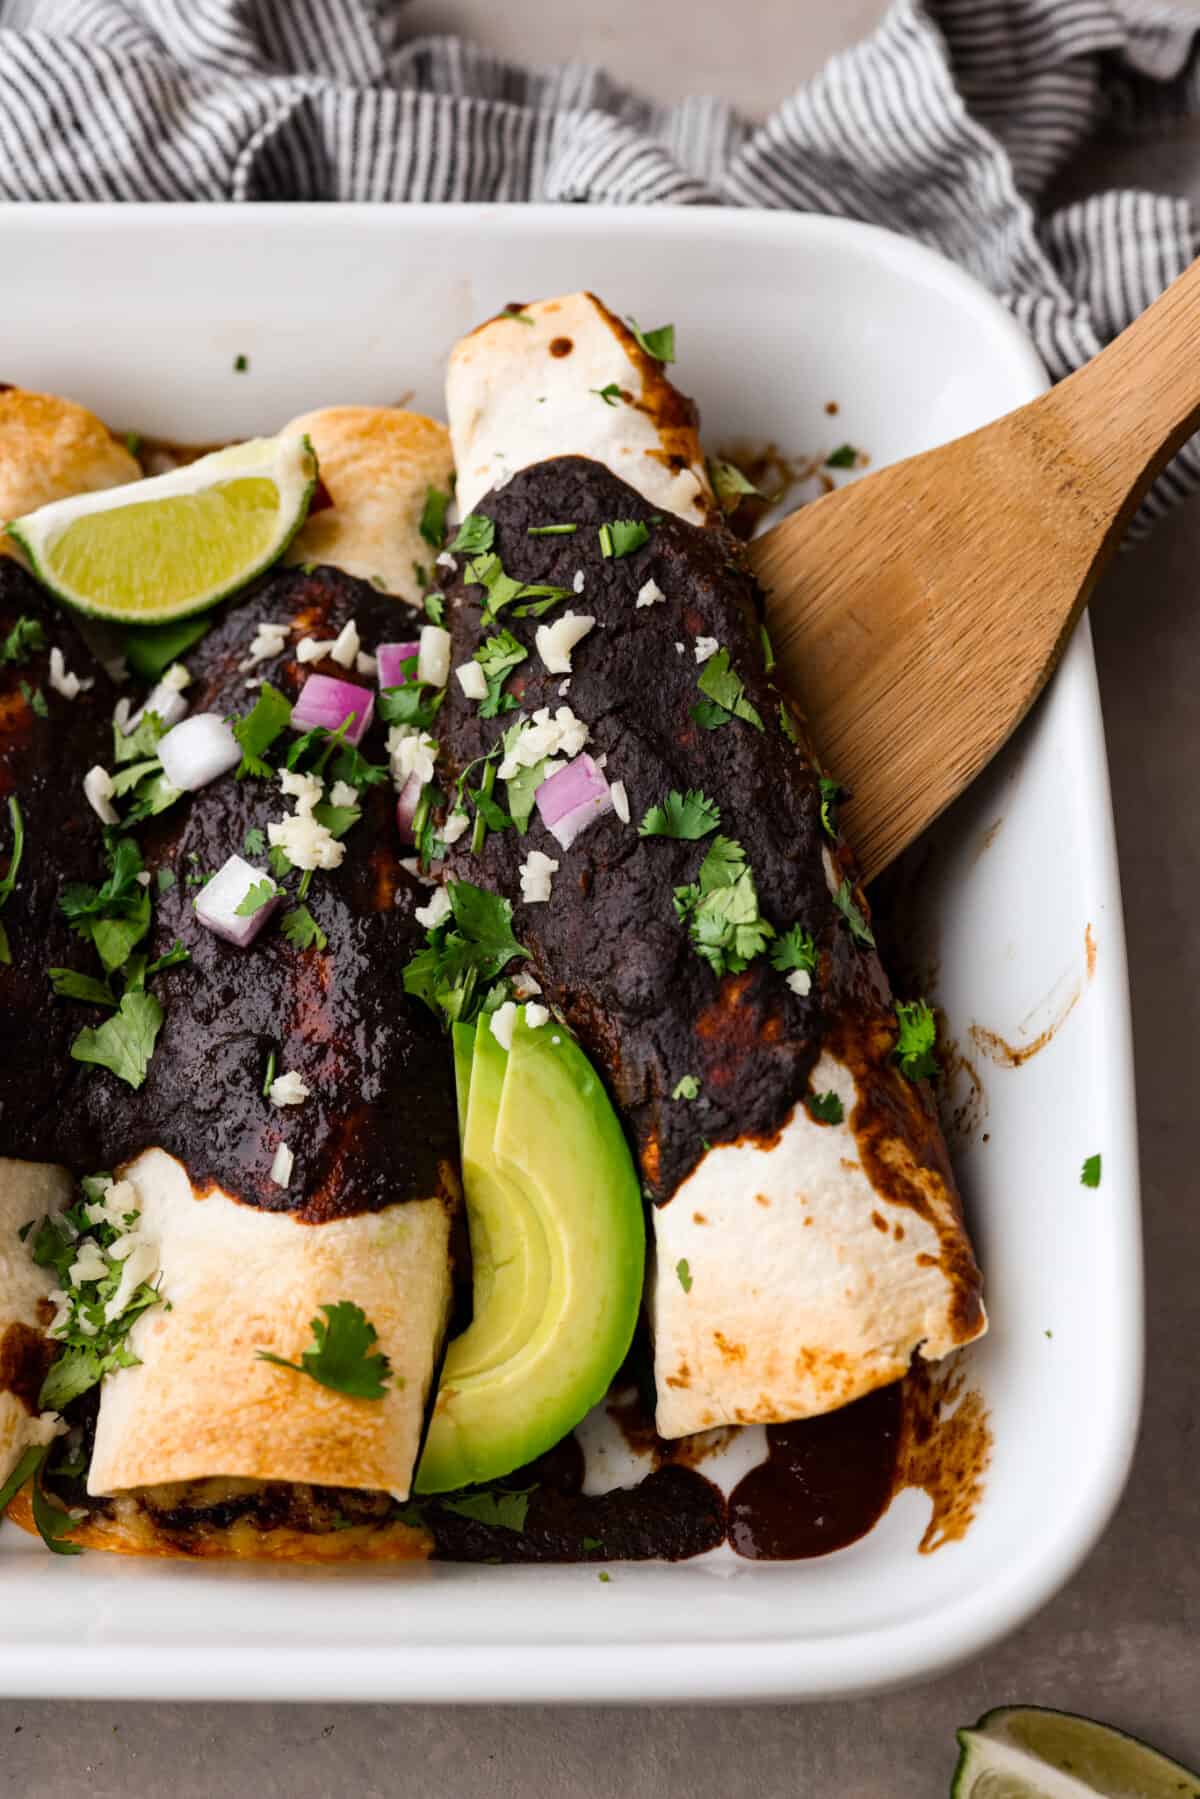 One enchilada being served with a wooden spatula.